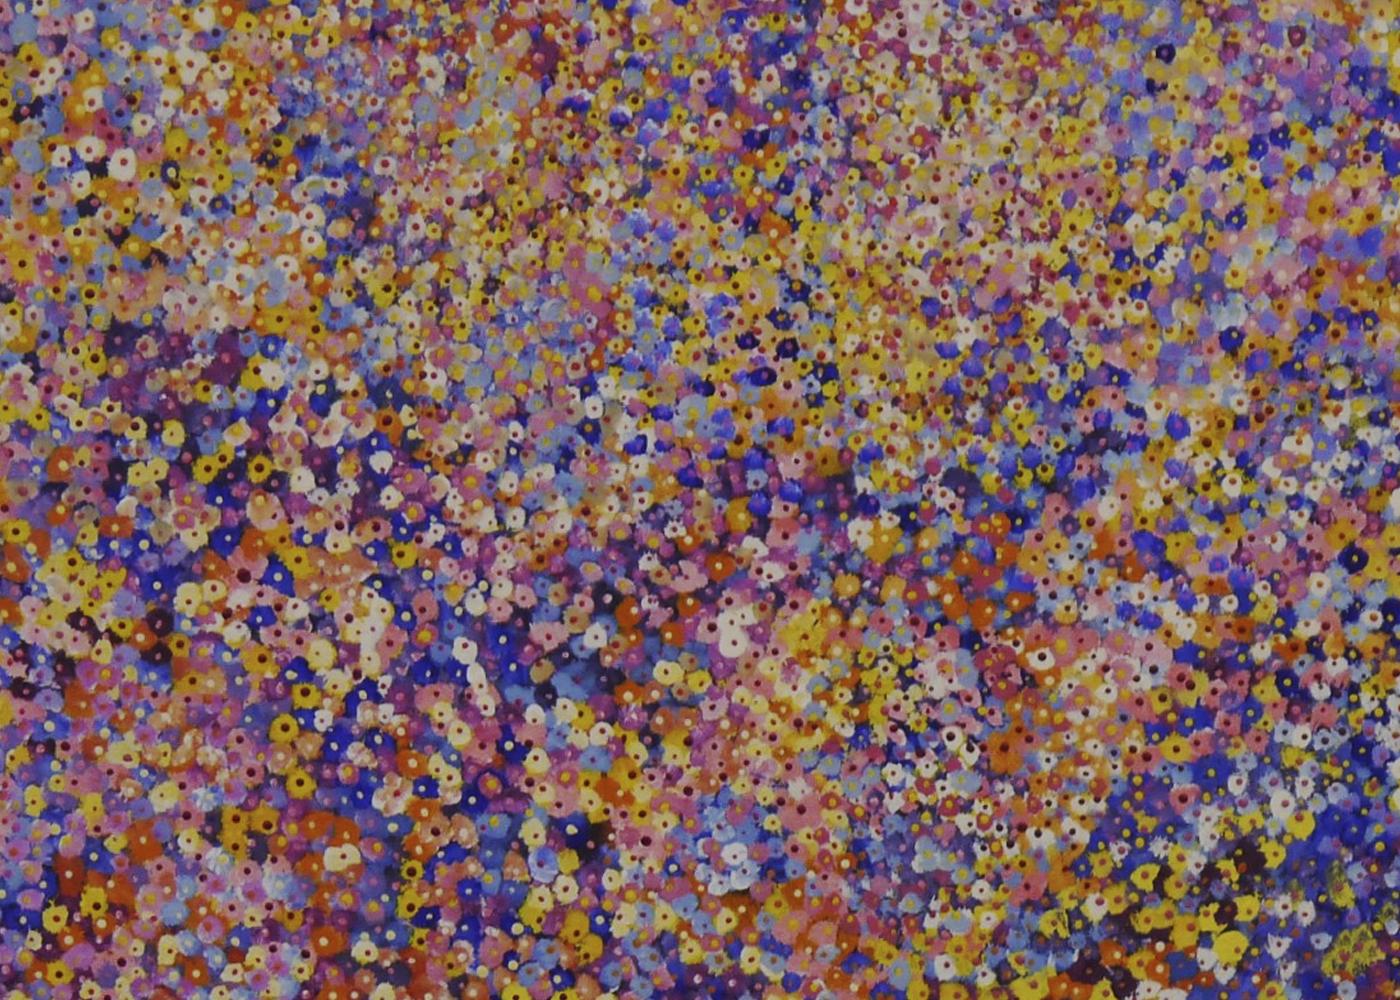 Kathy Maringka's distinctive paintings of wildflowers capture the splendor of the Australian bush just after the rain when the red desert is transformed by a blanket of colorful flowers, many of which only live for a few days.

Maringka's paintings